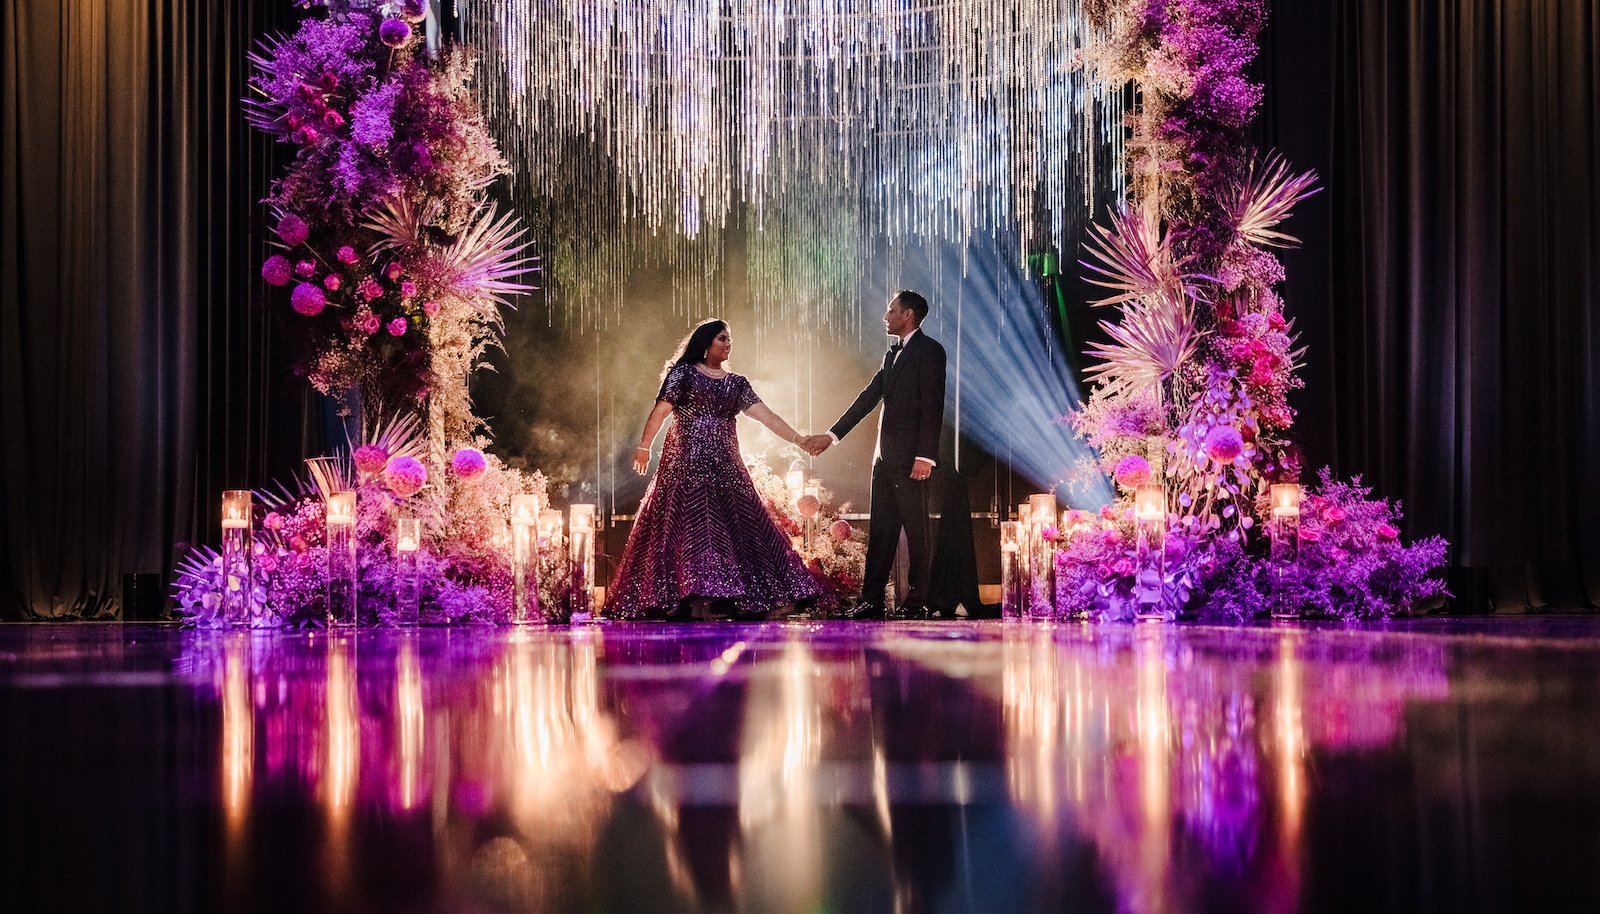 Read 5 Favorite Lighting Techniques for Wedding Receptions by JD Fitzgerald